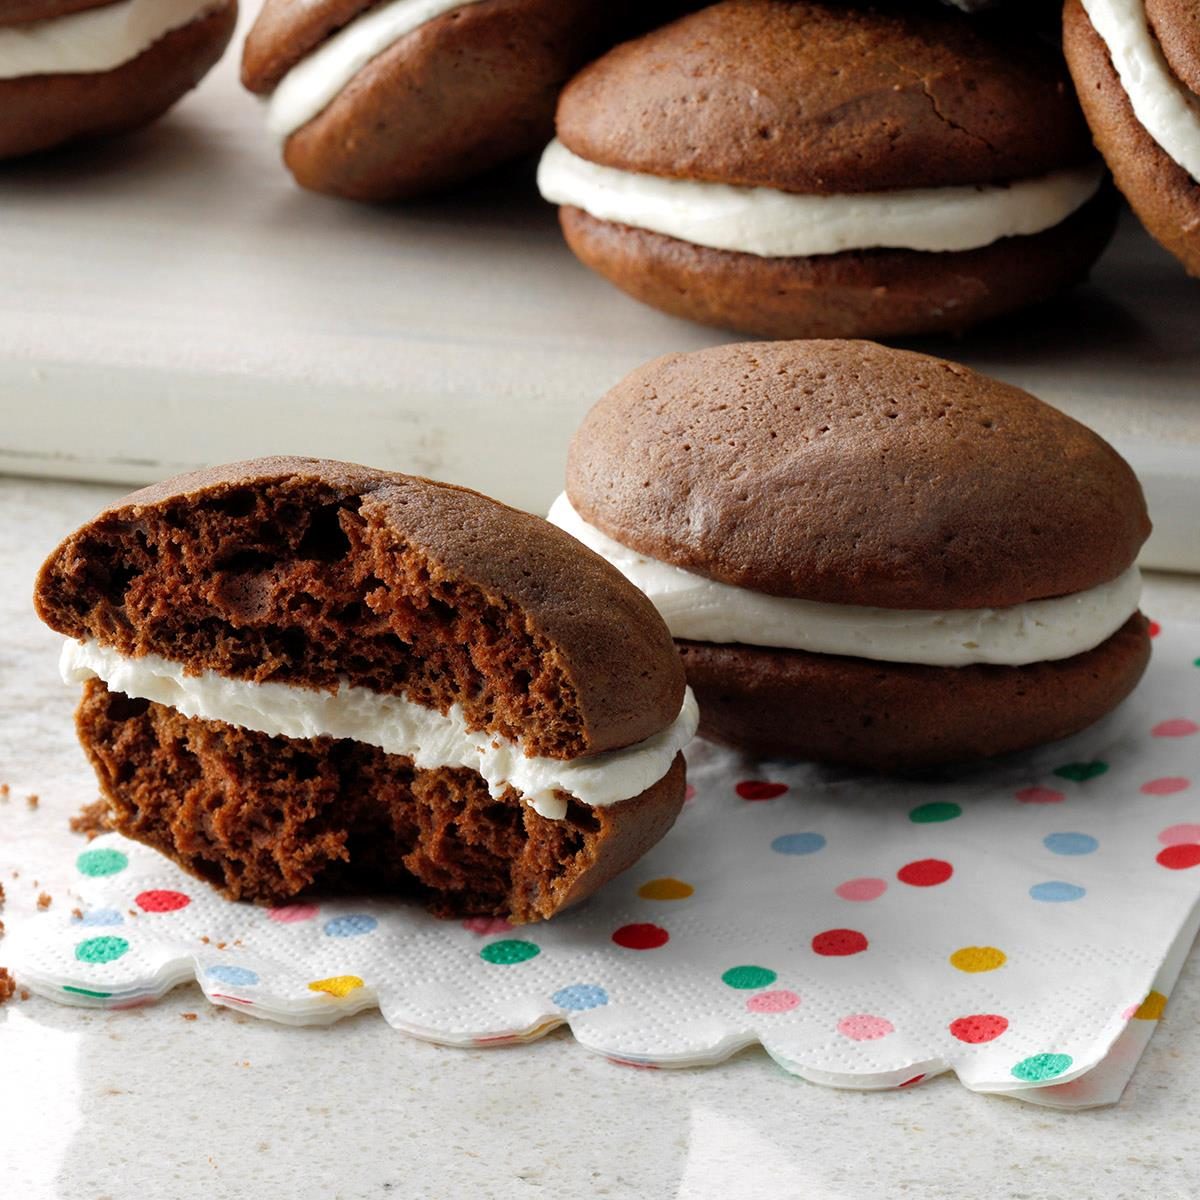 https://www.tasteofhome.com/wp-content/uploads/2018/01/Old-Fashioned-Whoopie-Pies_EXPS_BWCR21_8448_B04_06_15b-2.jpg?fit=700%2C1024